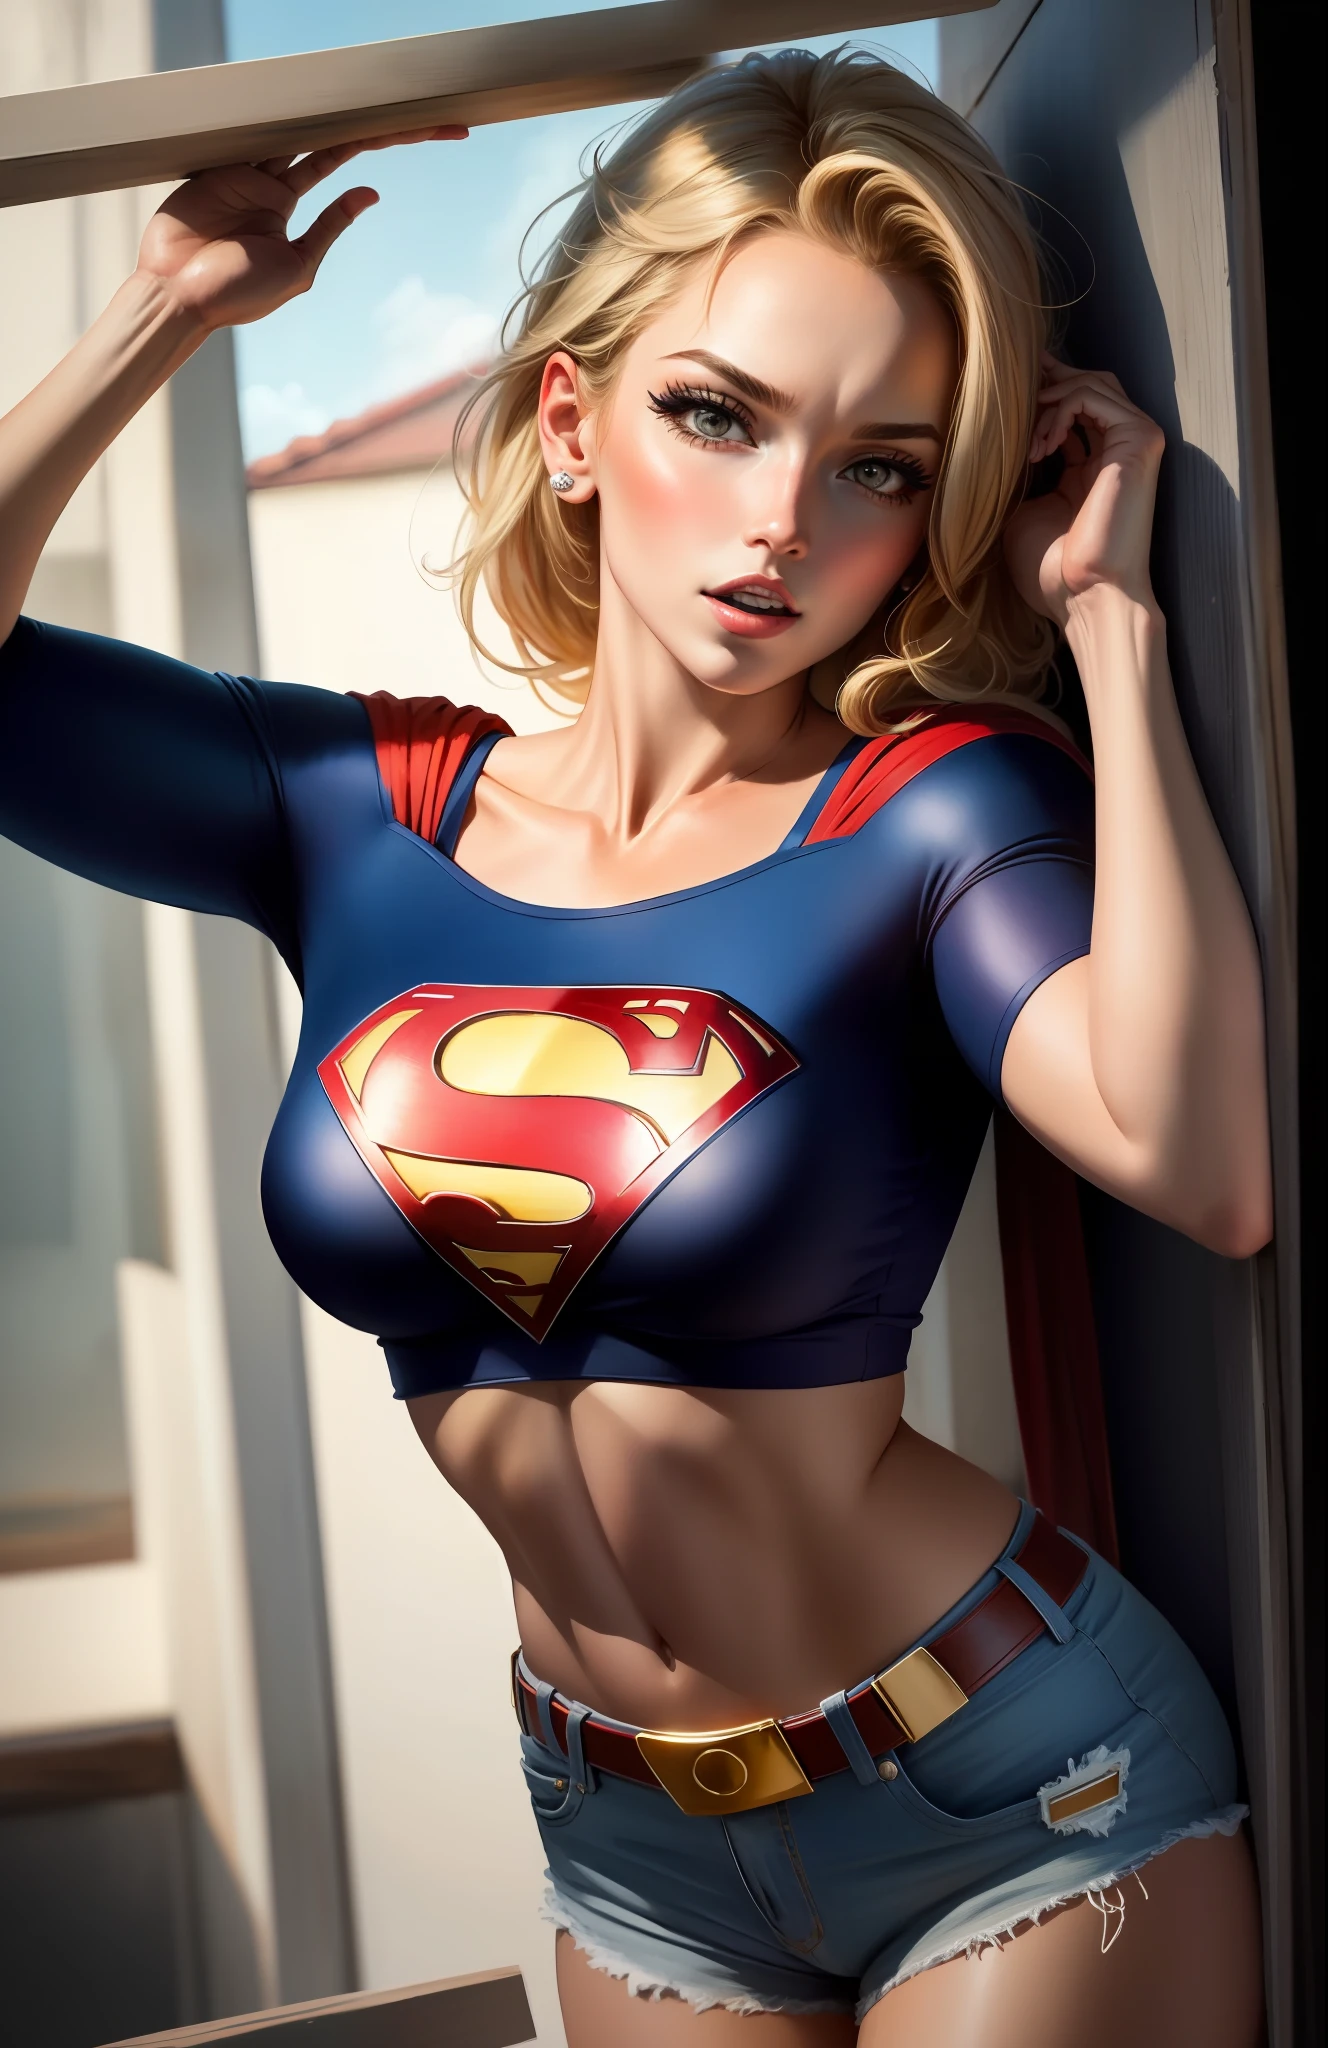 (), big boobies,(Masterpiece artwork), best qualityer, extremely detaild, (water colour), flowers, delicate and beautiful, illustration, (from low),(1 blonde:1.4), (soli:1.2), breasts big, (wet blouse with Superman letter S:1.3), off-shoulder wet blouse, (short shorts:1.2), bared shoulders, (underboob:1.2), blue colored eyes bonitos, pawg, (extremely long shaggy curly hair), fot, over shoulder shot, por Alex Maleev, proffesional, Canon Camera, Nikon Camera, Sharp, bokeh,  studio quality, Fish-eye lens, by Robert Capa , stick out tongue, blue colored eyes. Superman symbol in the background.